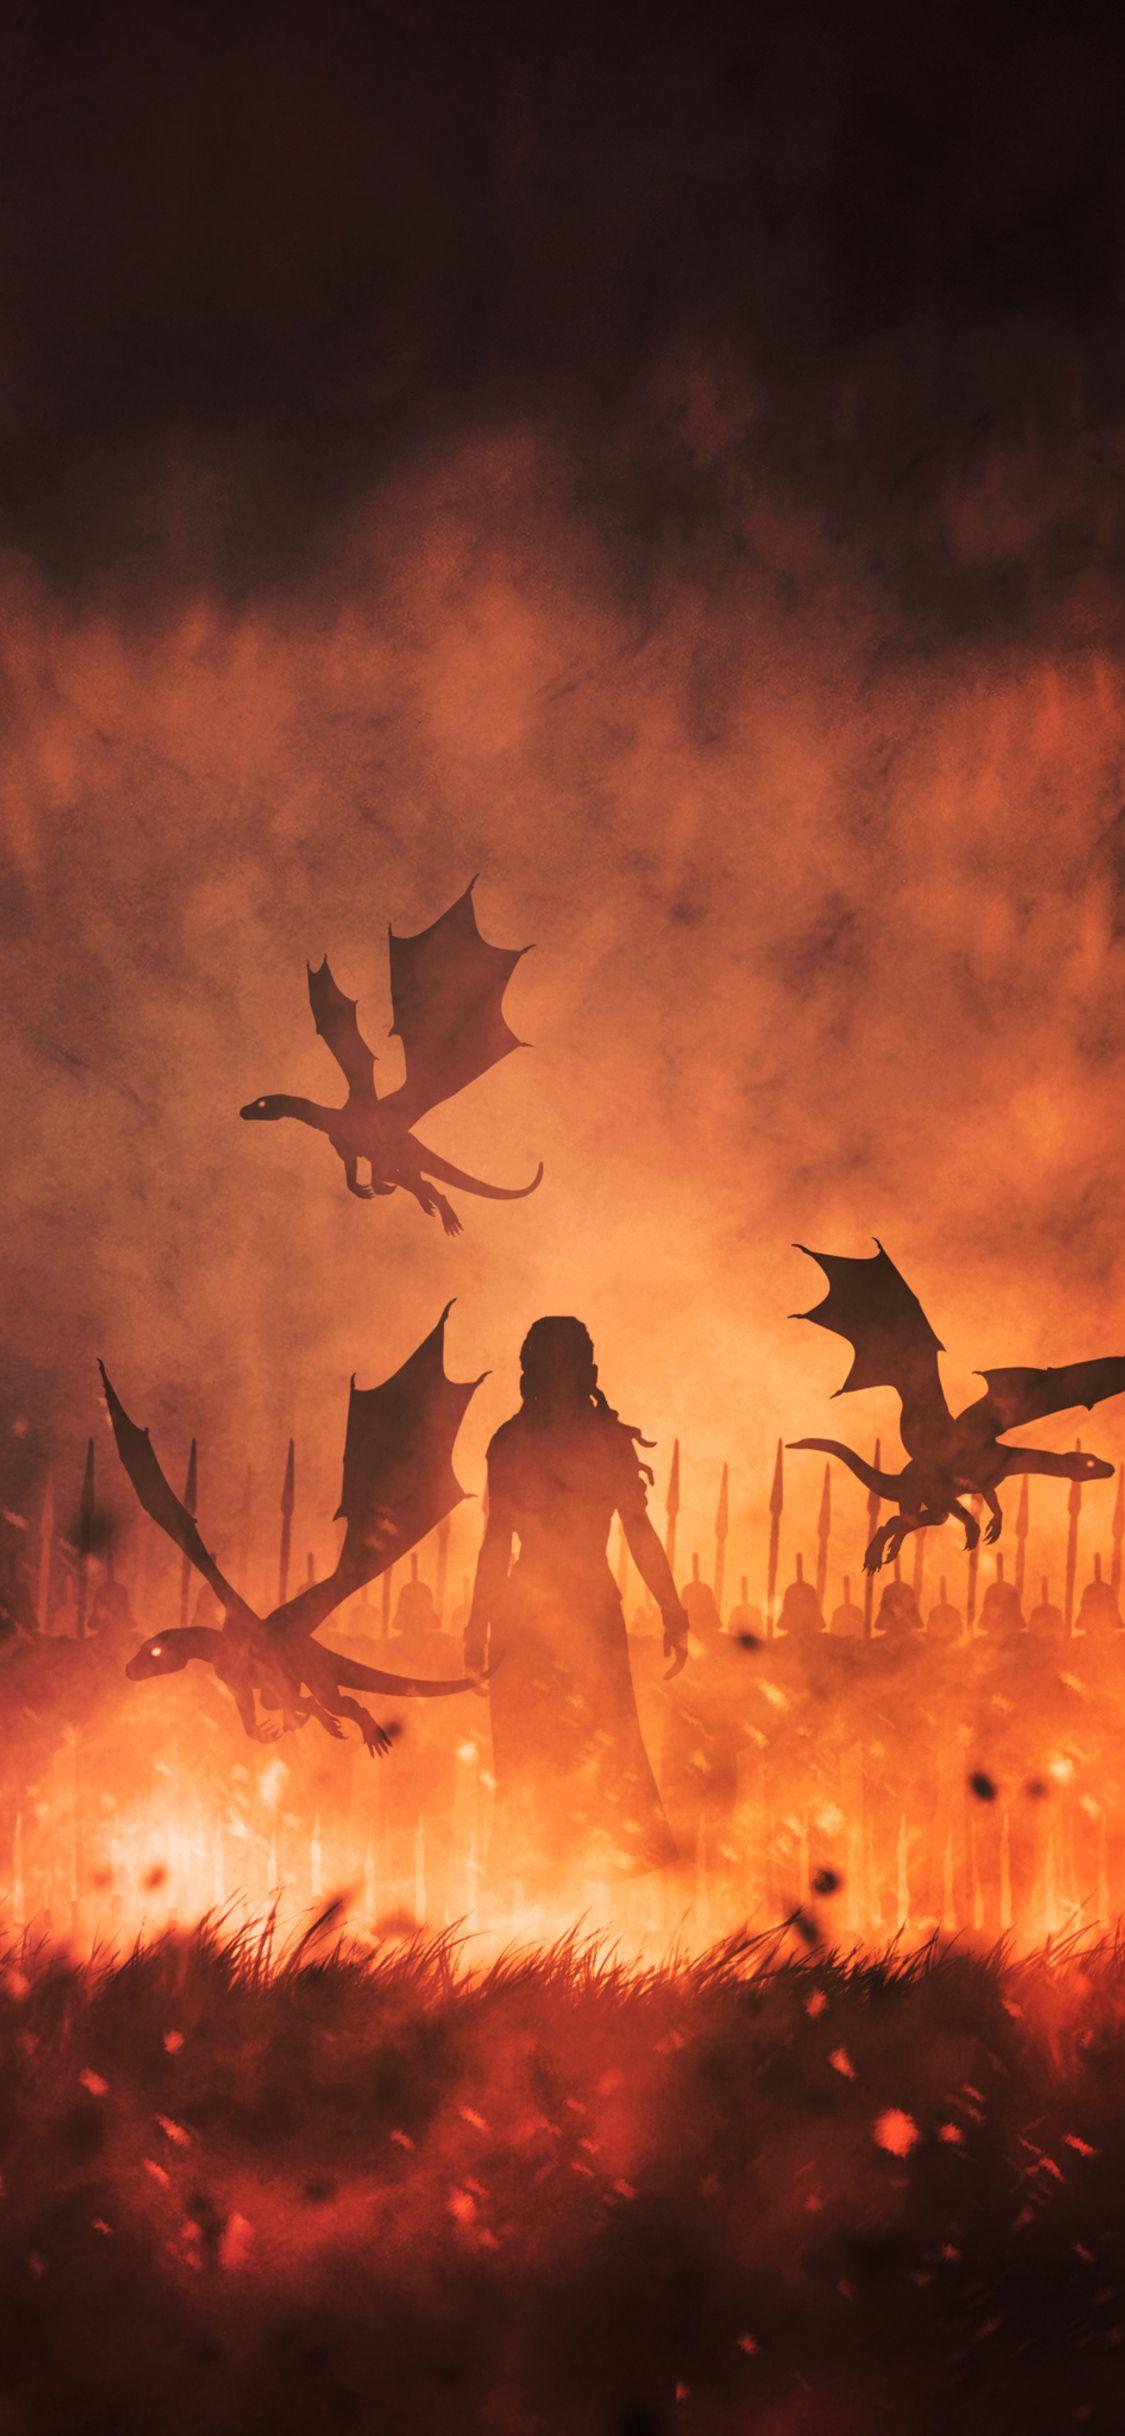 Download Complete your Game Of Thrones experience with an iPhone Wallpaper   Wallpaperscom